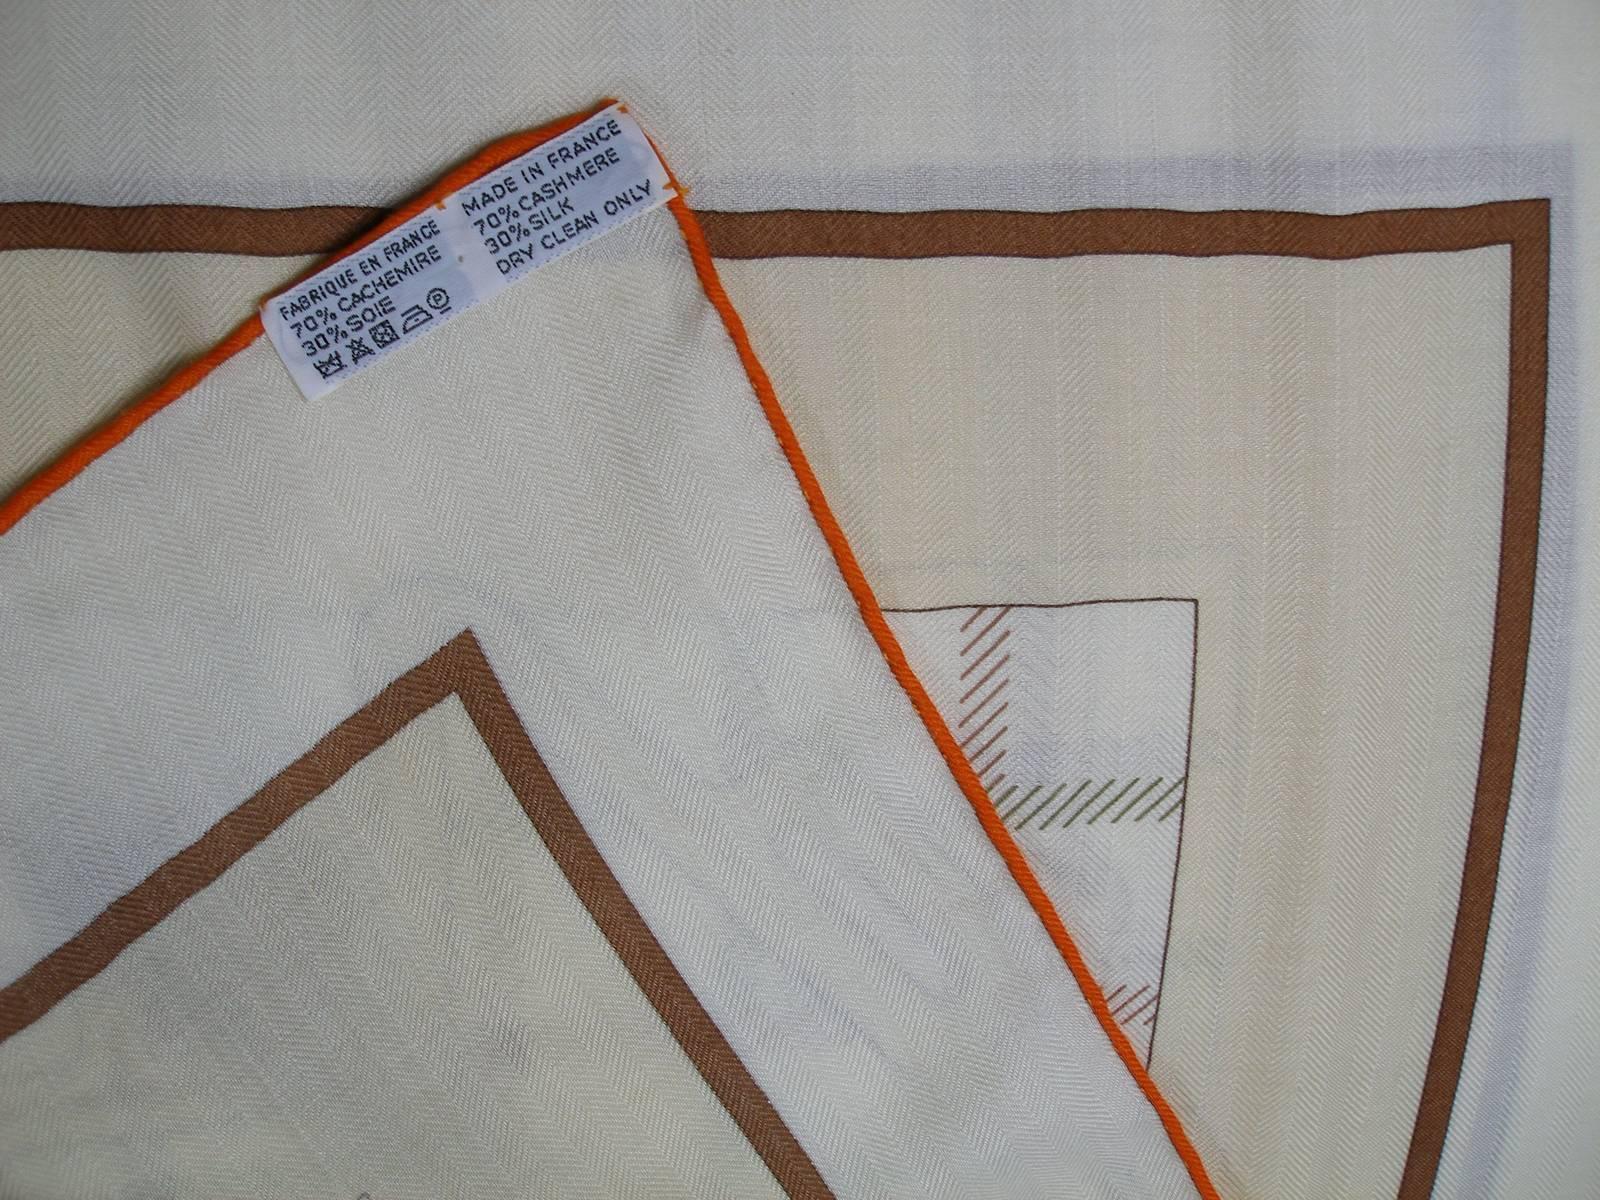 Brown Hermès 140cm or 55 Inch GM Shawl Tatersale By Henri d'Origny Cashmere Brand New For Sale